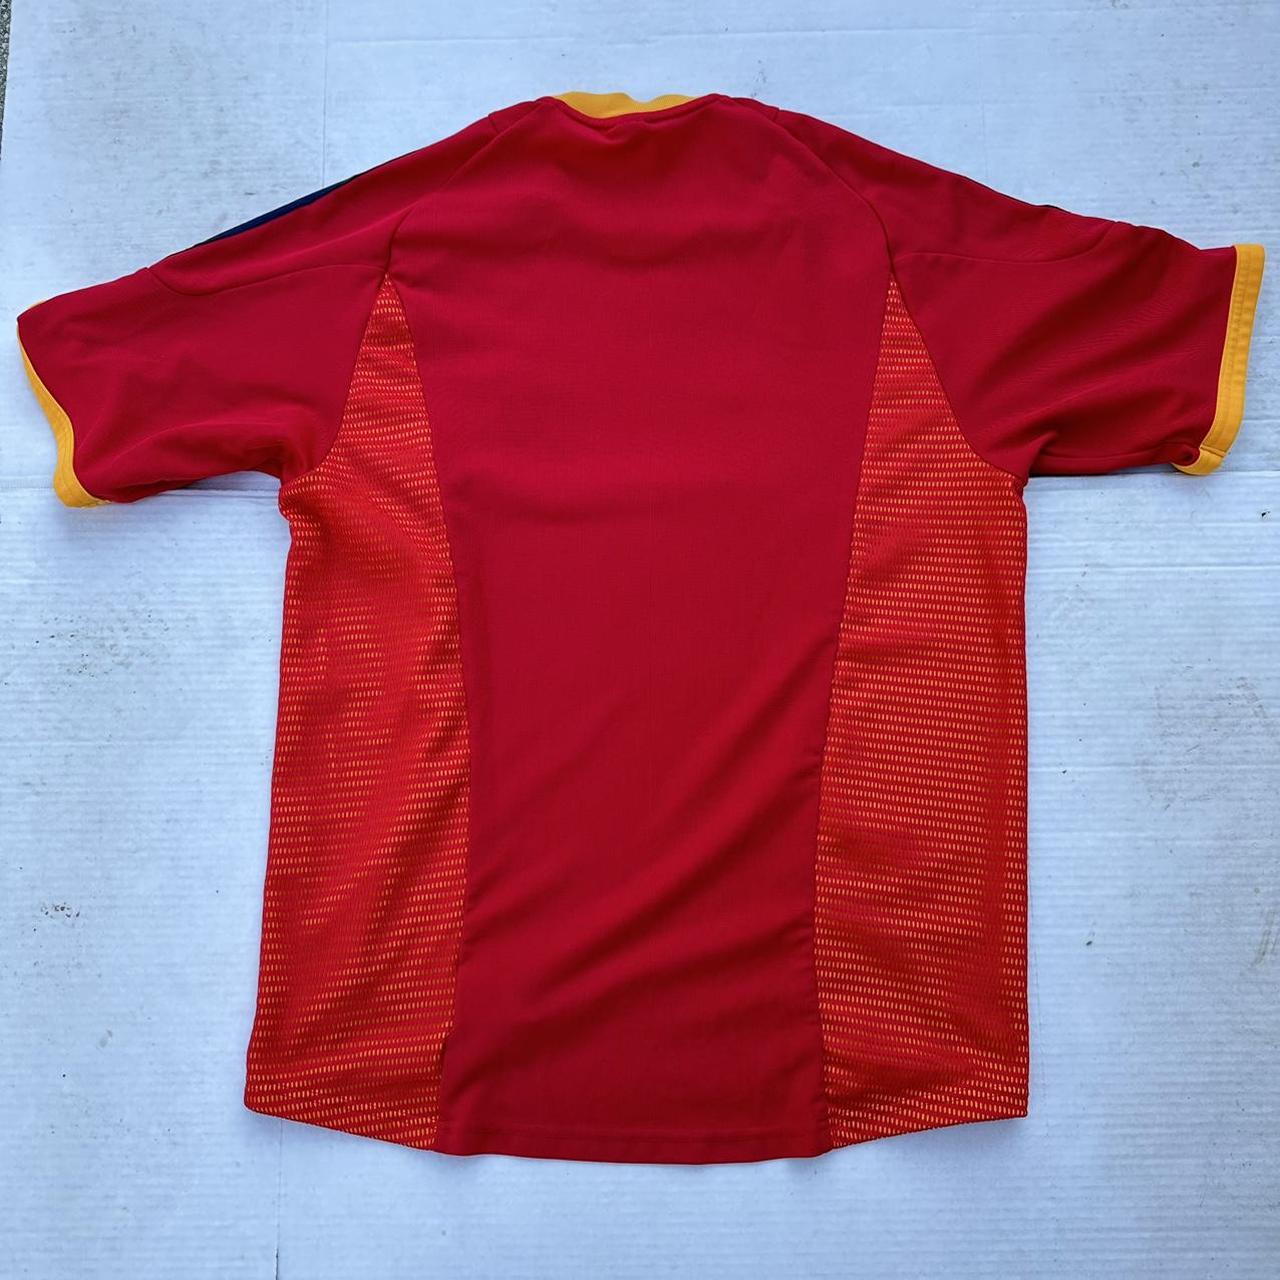 Adidas Men's Red and Yellow T-shirt (3)